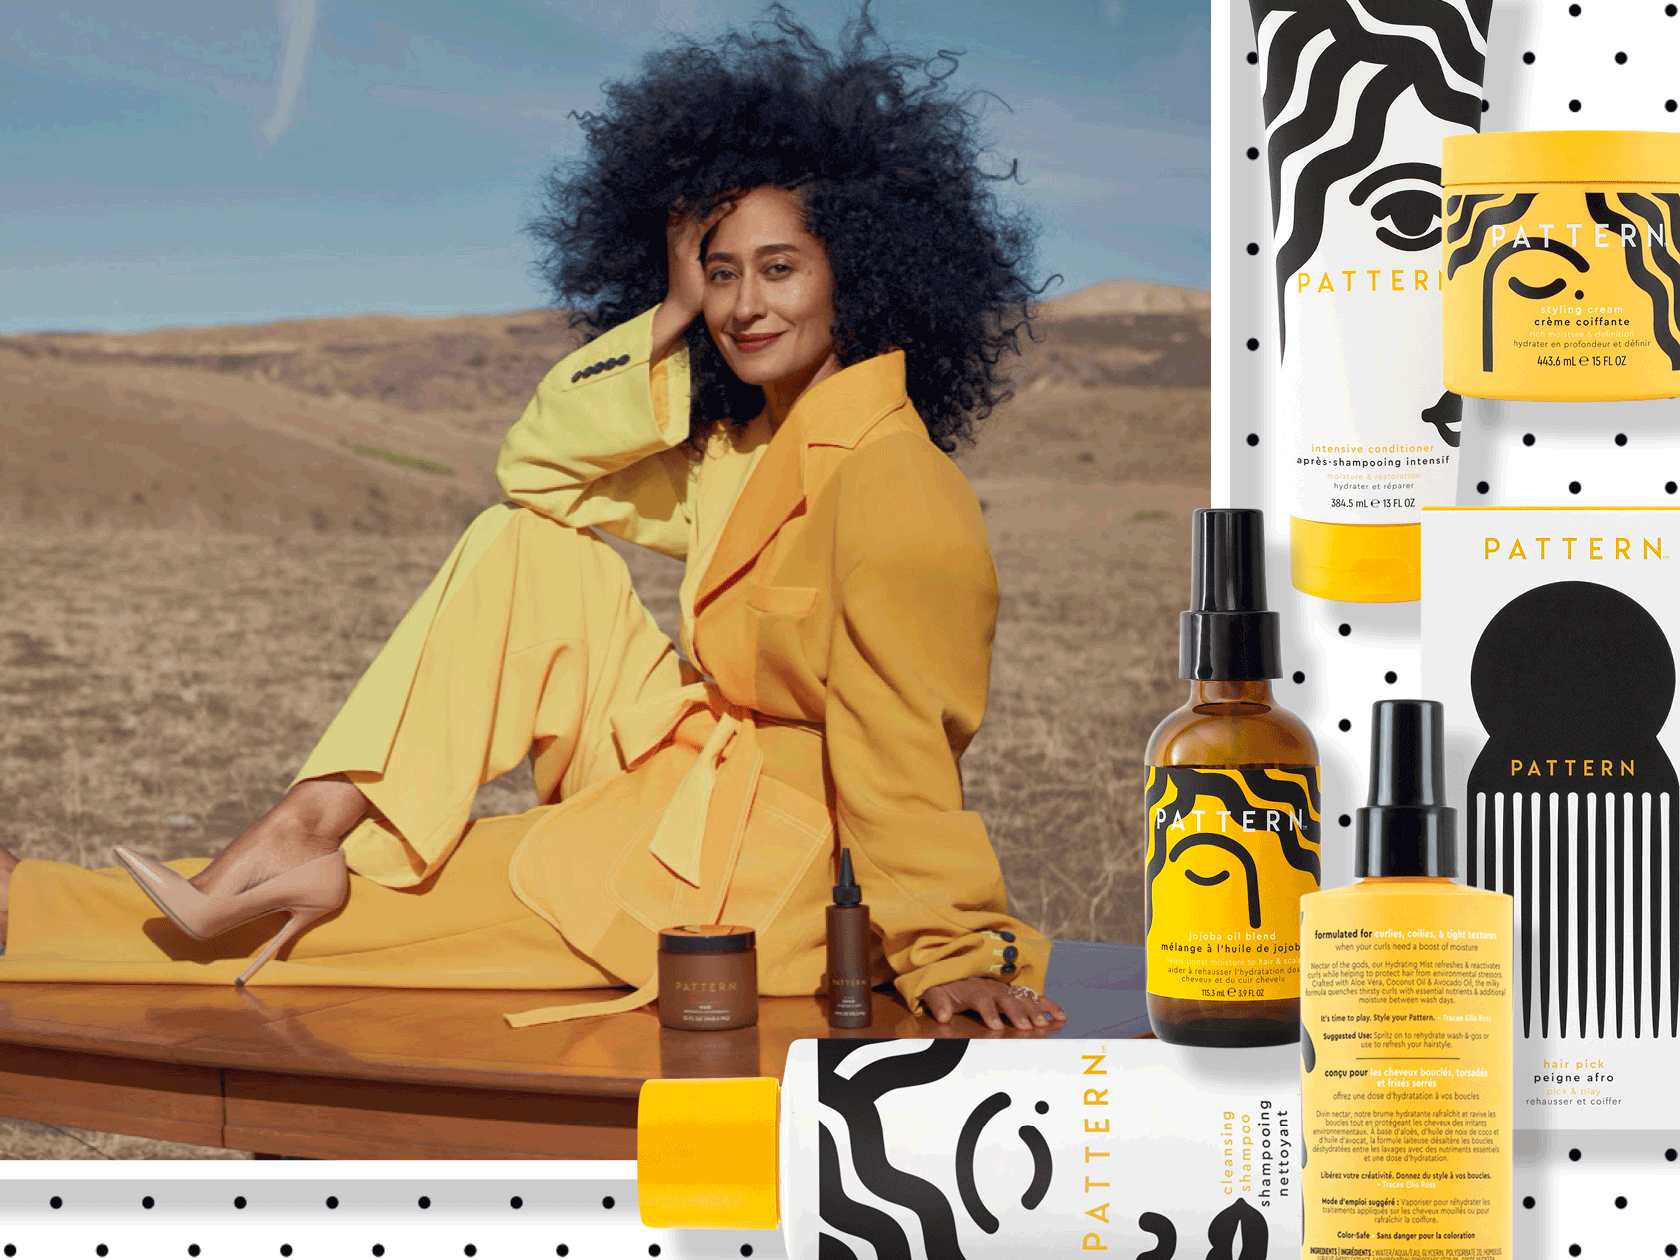 Tracee Ellis Ross's Pattern Beauty is now available in the UK